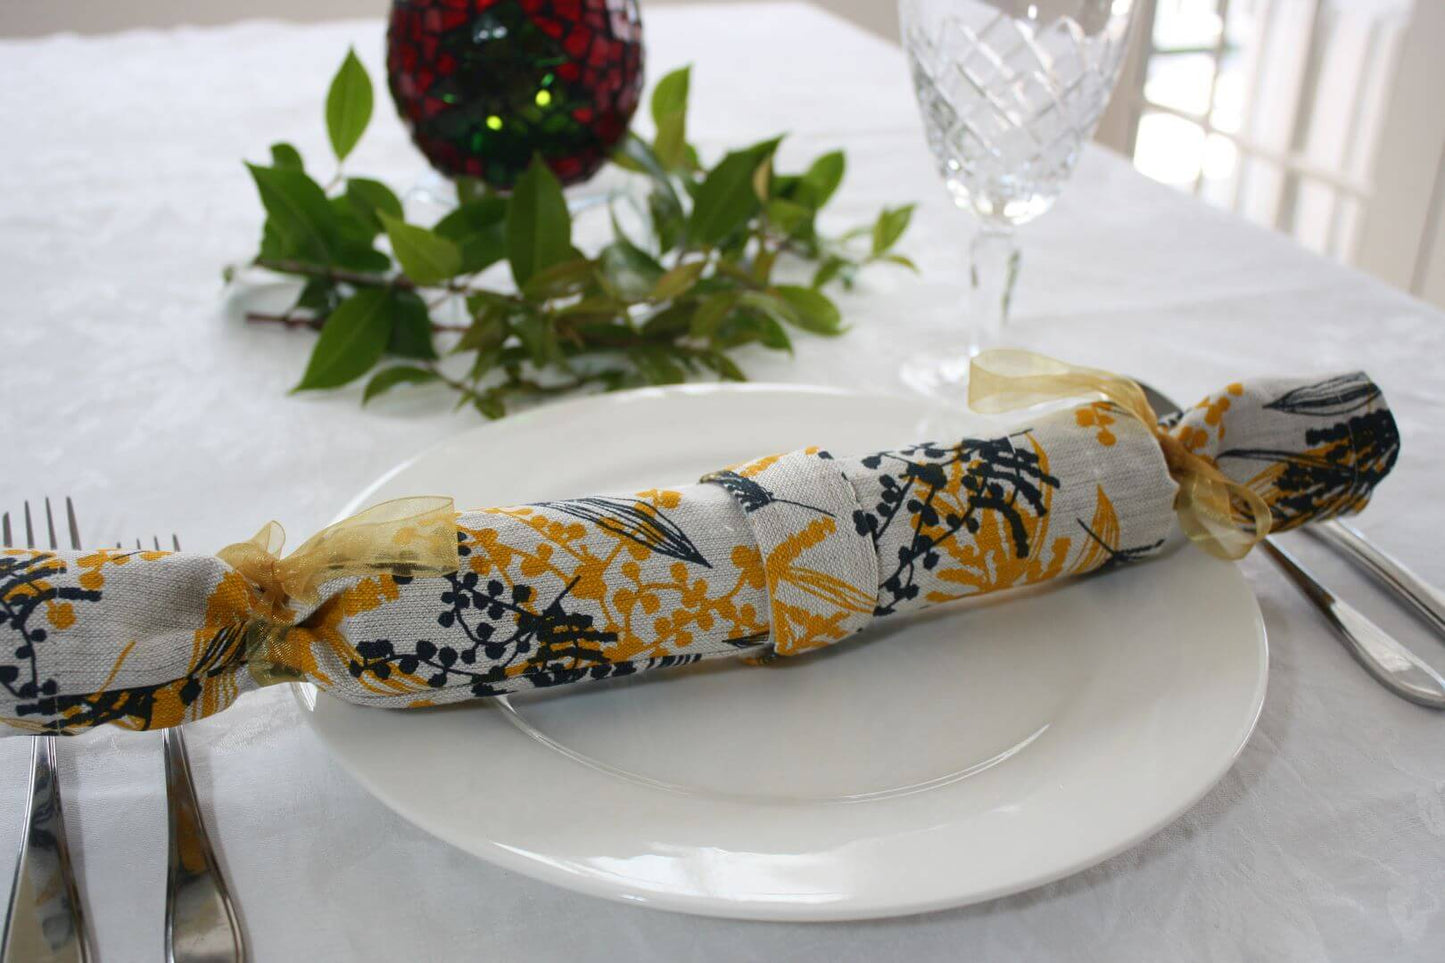 Set of 4 : Re-useable Christmas Crackers (in design of your choice)